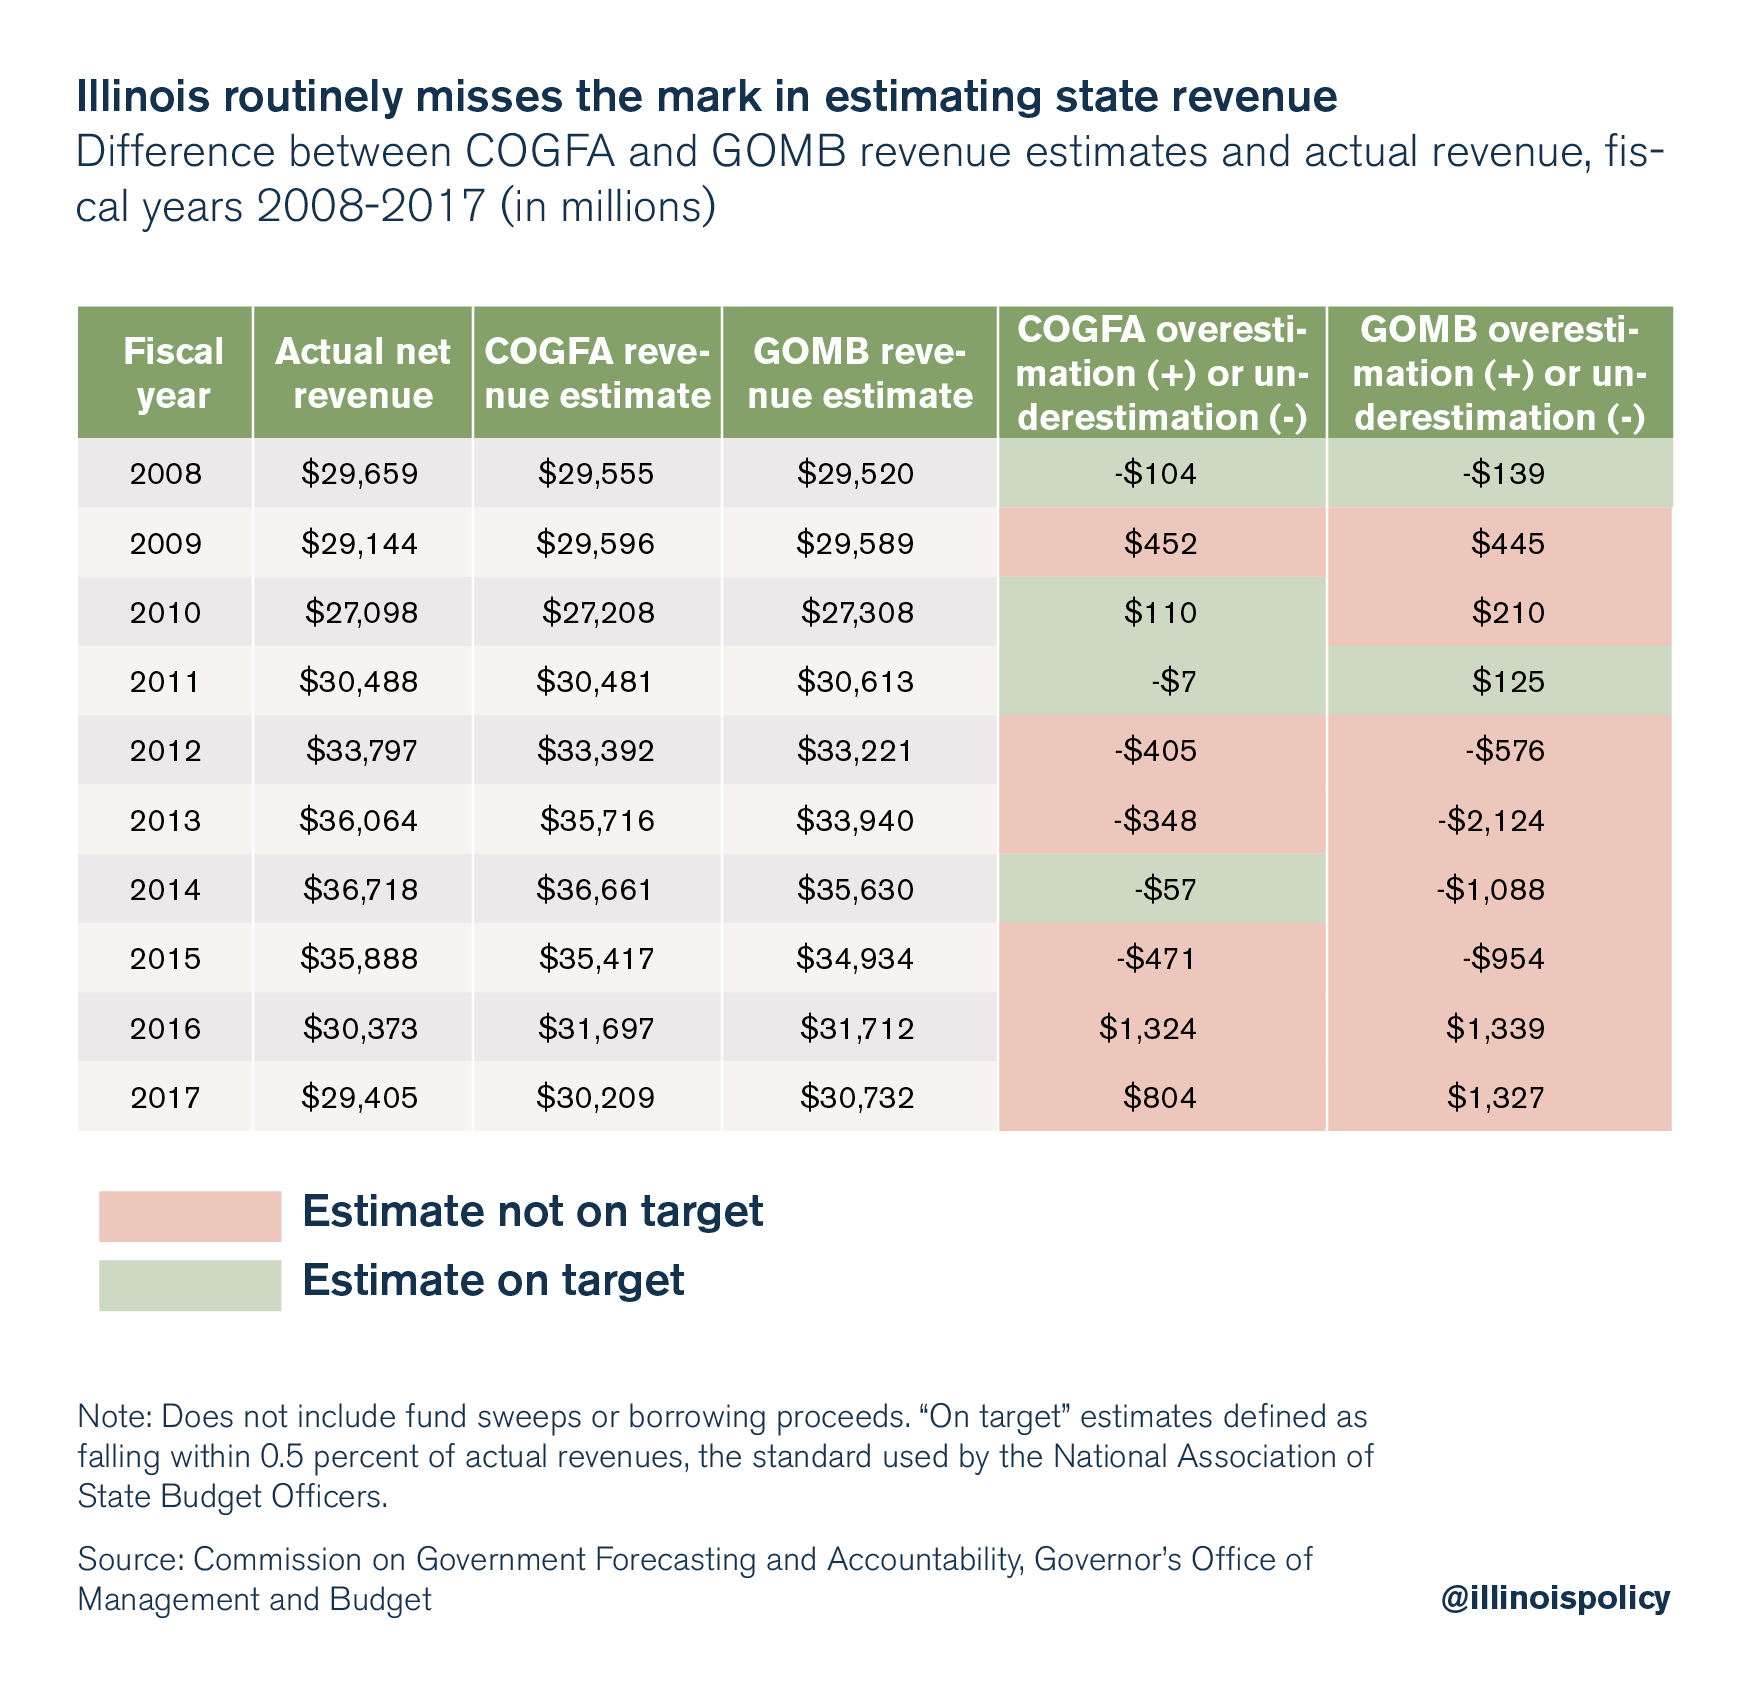 Illinois routinely misses the mark in estimating state revenue